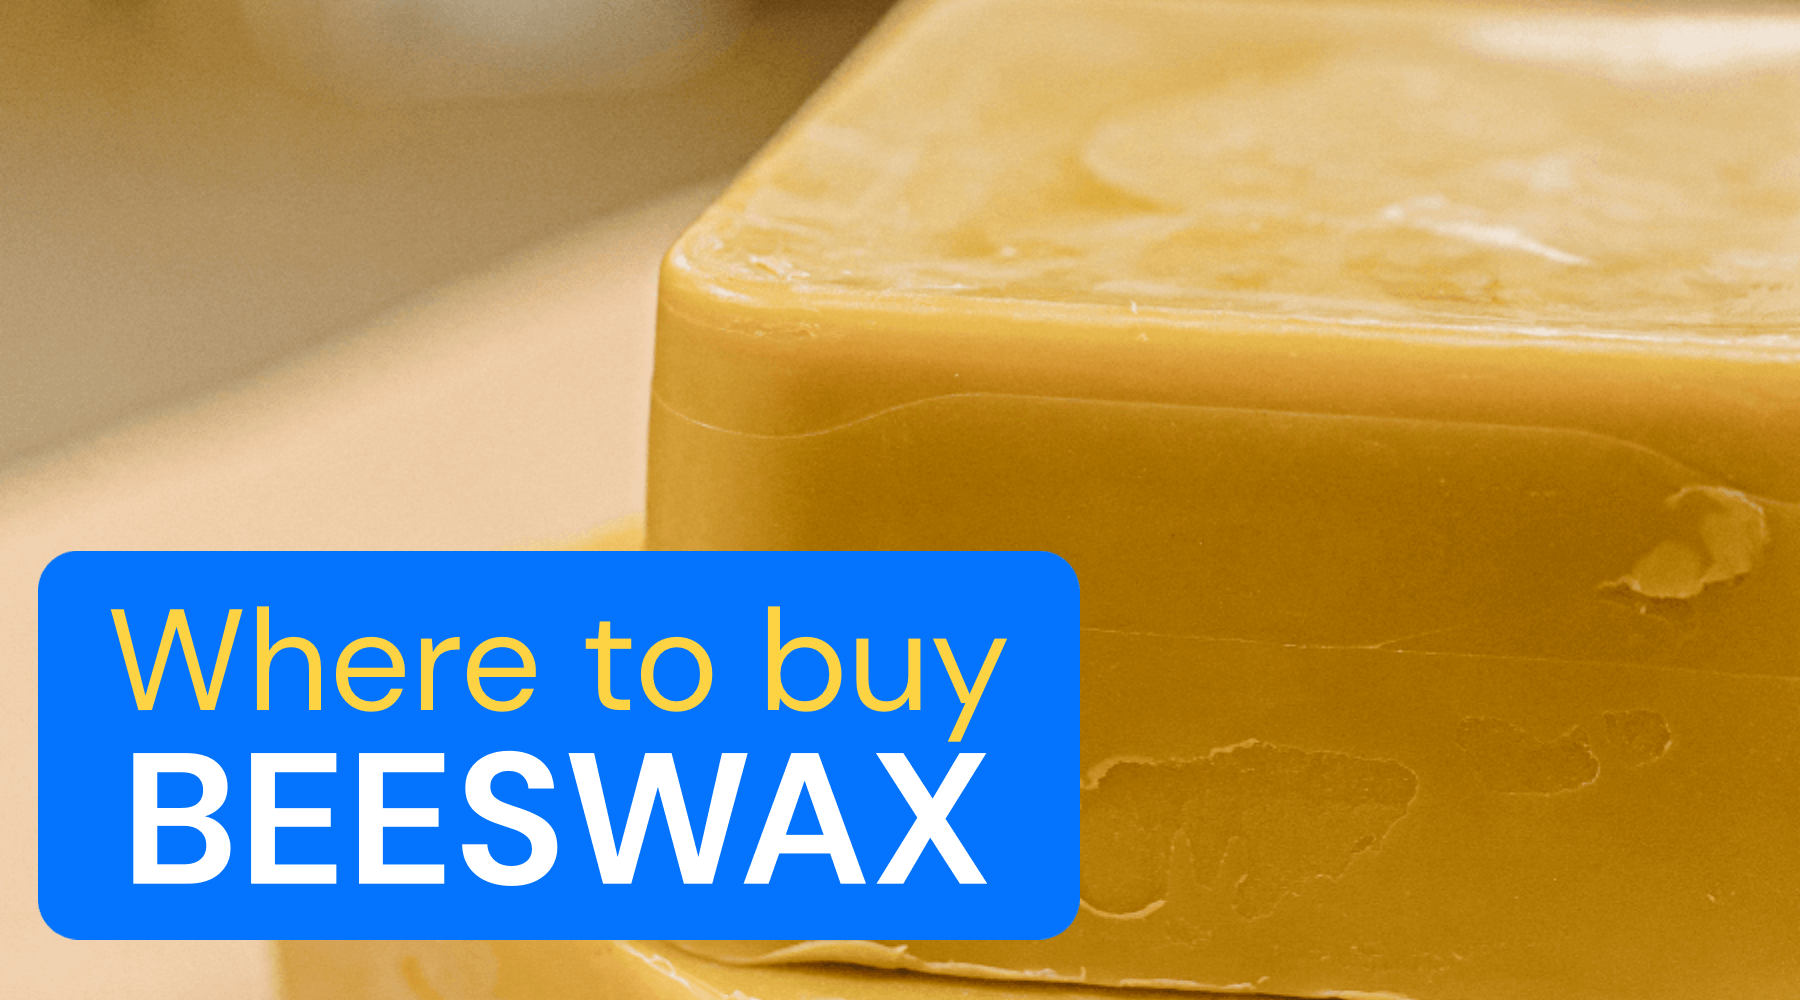 Where Can I Buy Beeswax?